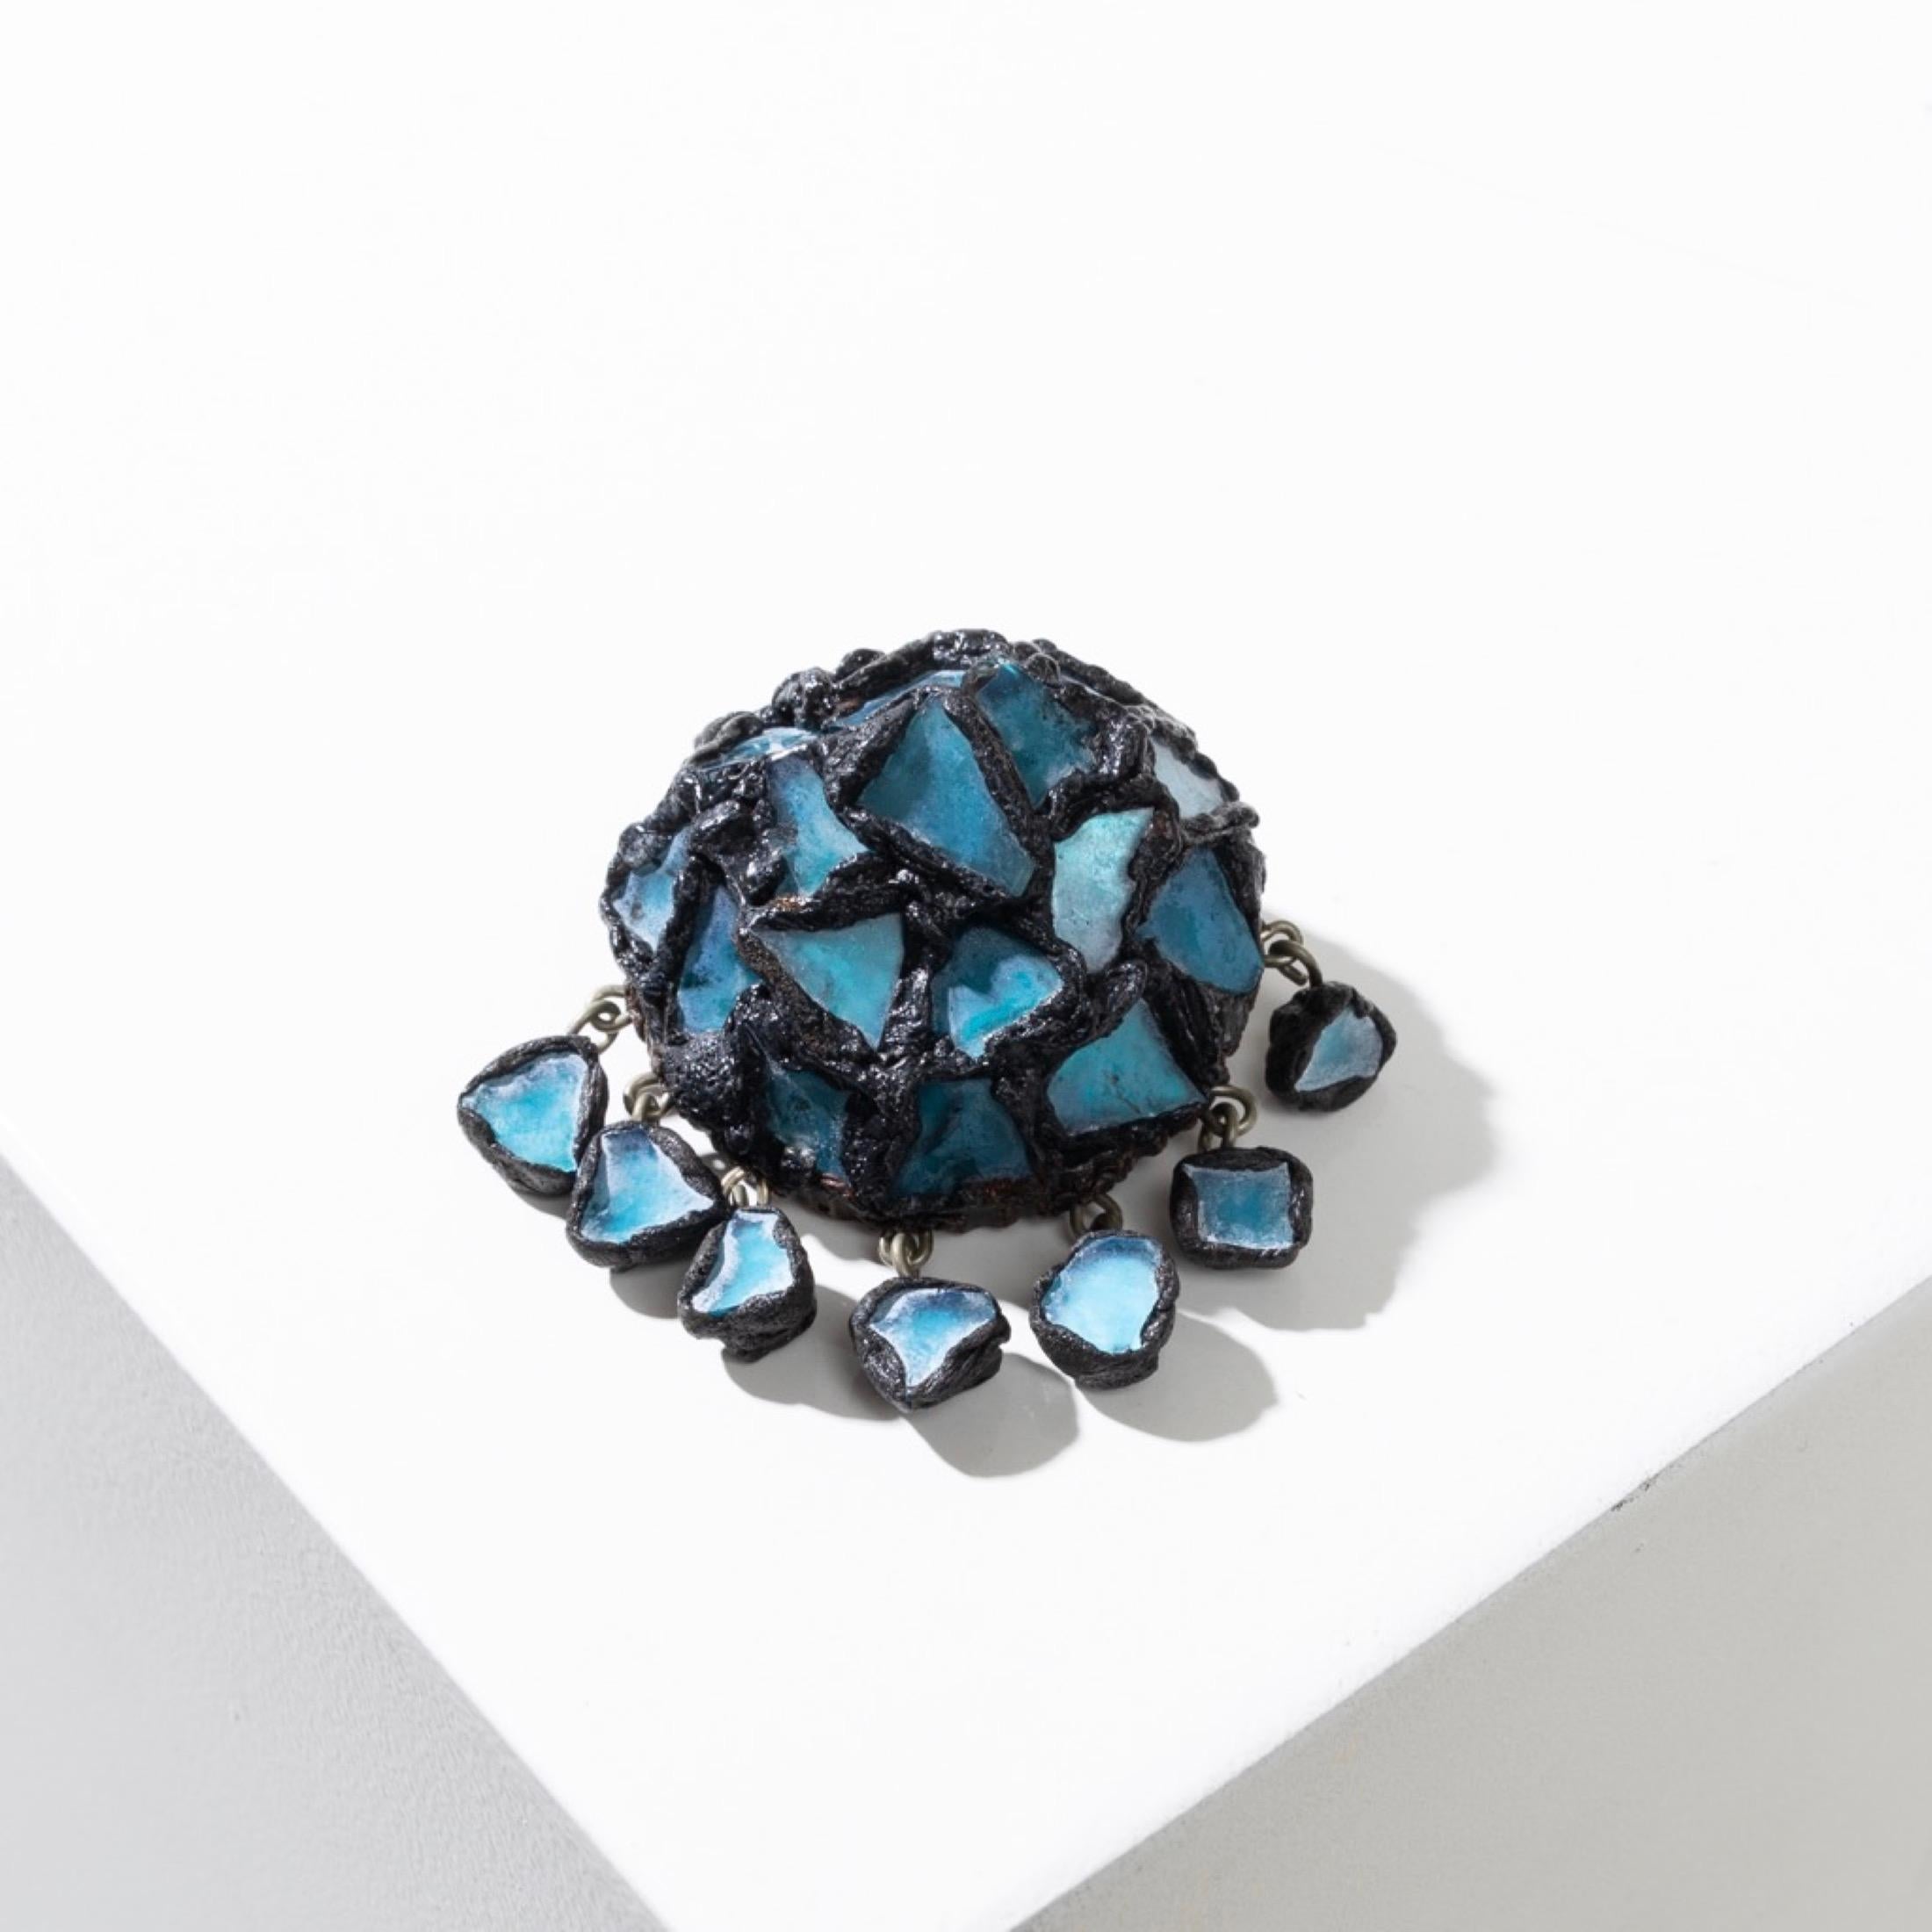 This black Talosel brooch by Line Vautrin, adorned with small blue mirrors artistically interlocking in the Talosel, presents a combination of textures and colors that perfectly reflects the work of Line Vautrin.
Seven small blue mirrors hanging